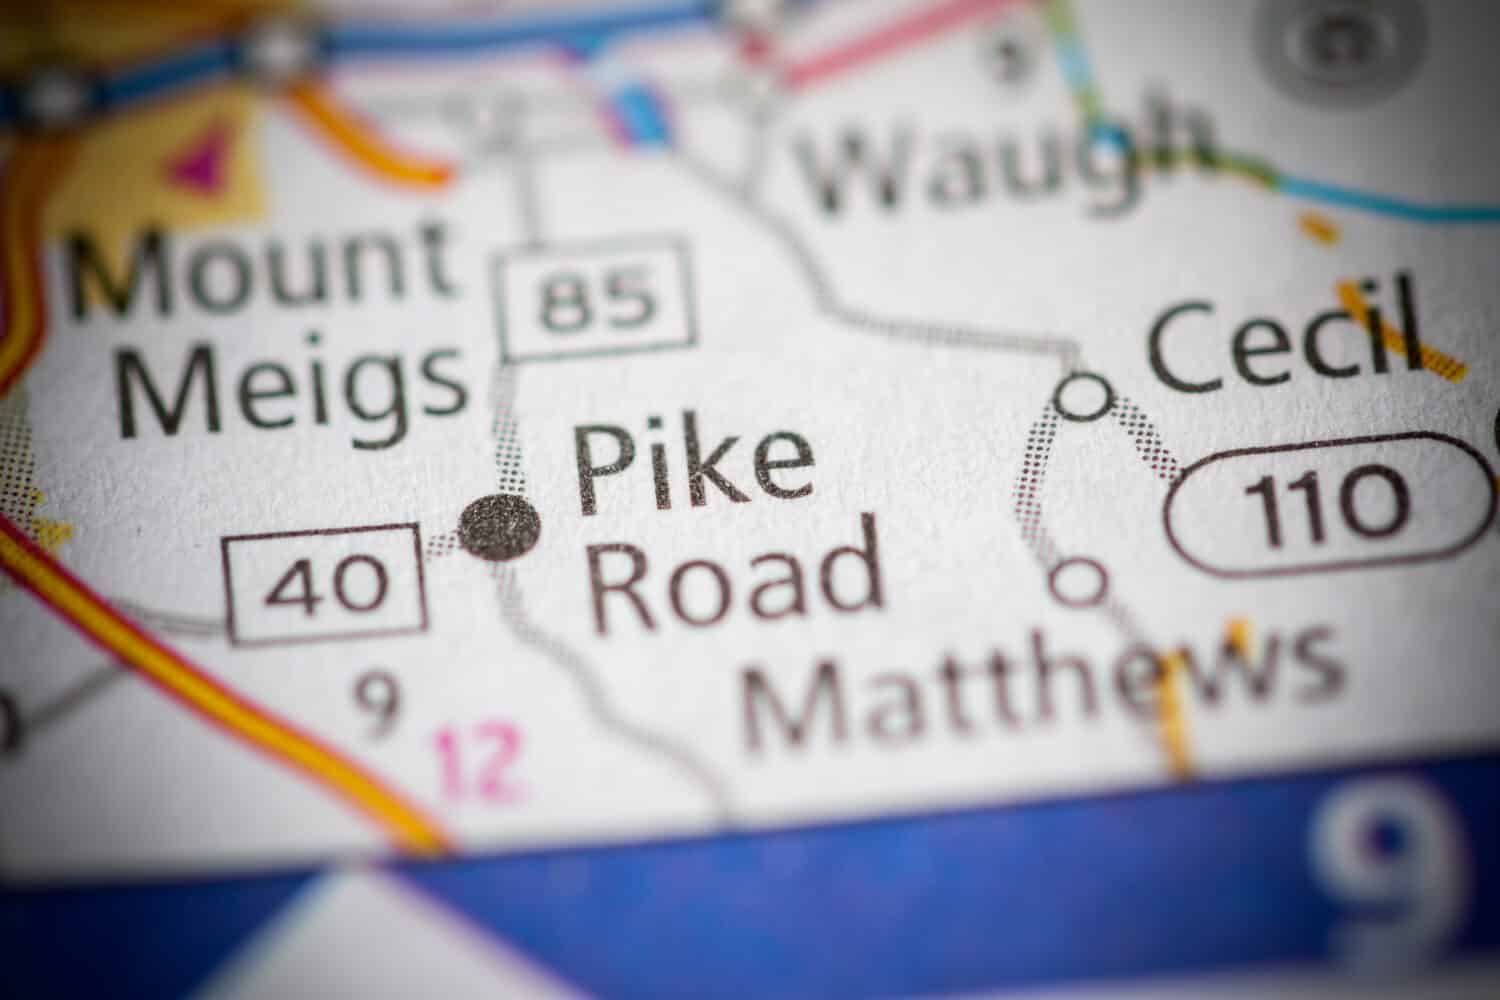 Pike Road. Alabama. USA is the fastest-growing town in Alabama.